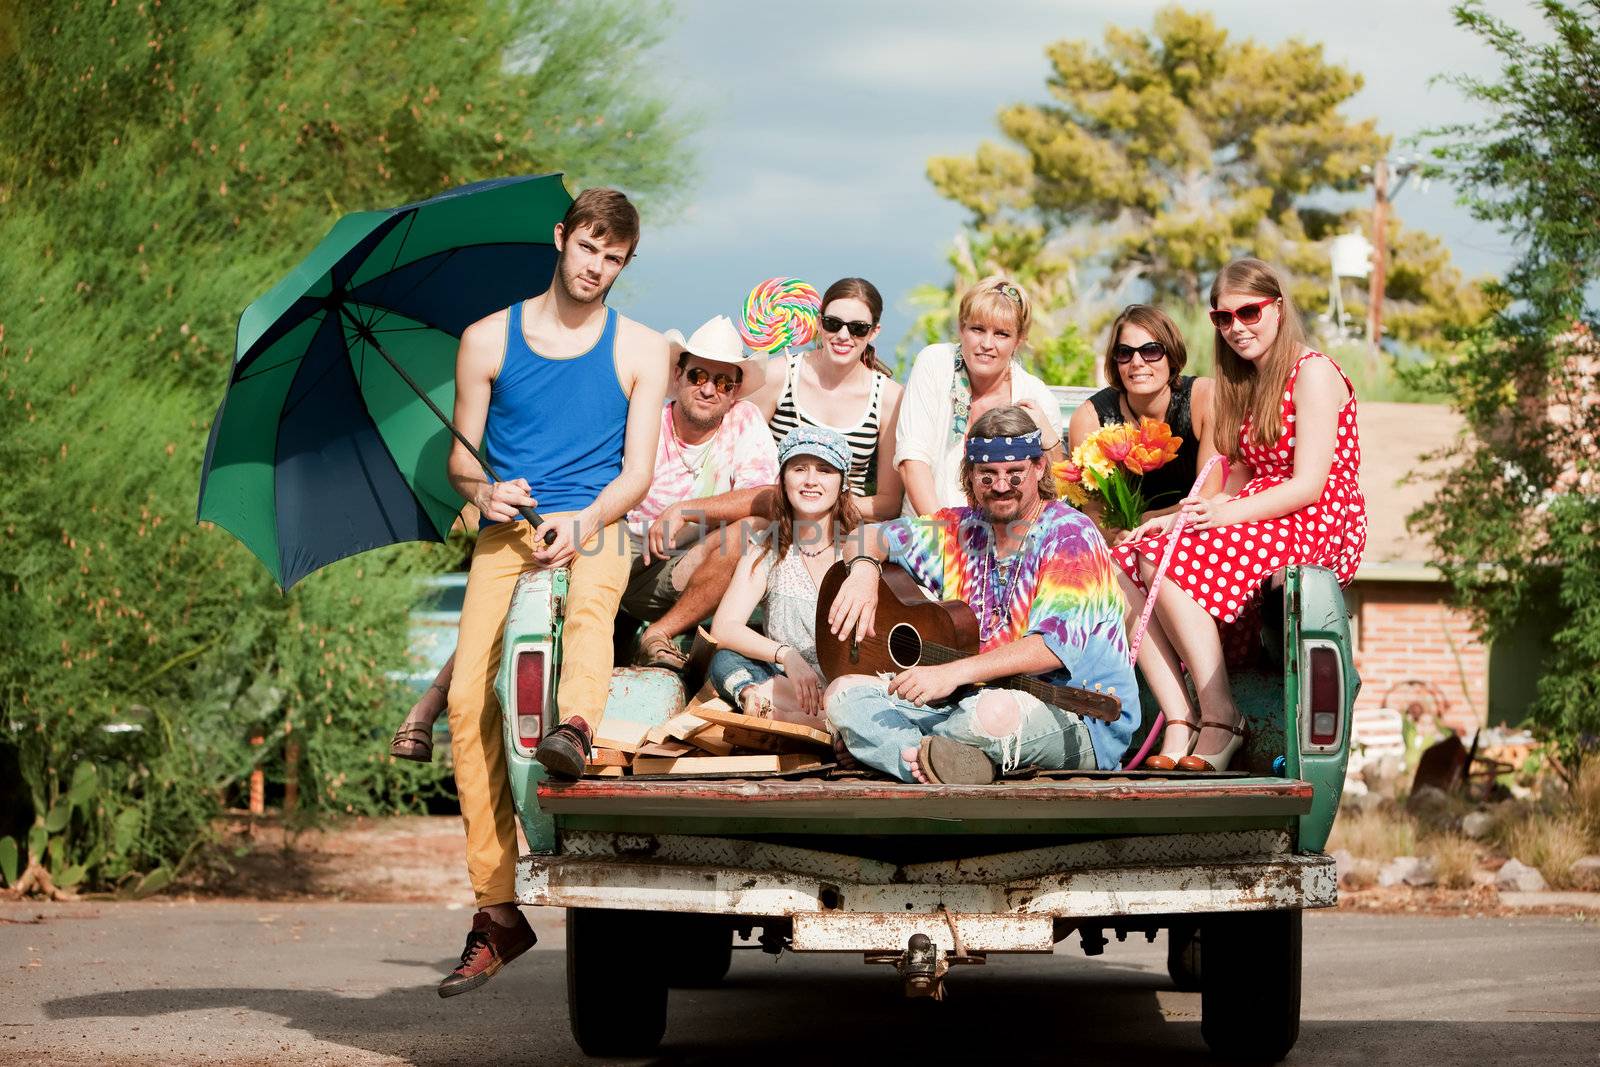 Groovy Group in the Back of Truck by Creatista